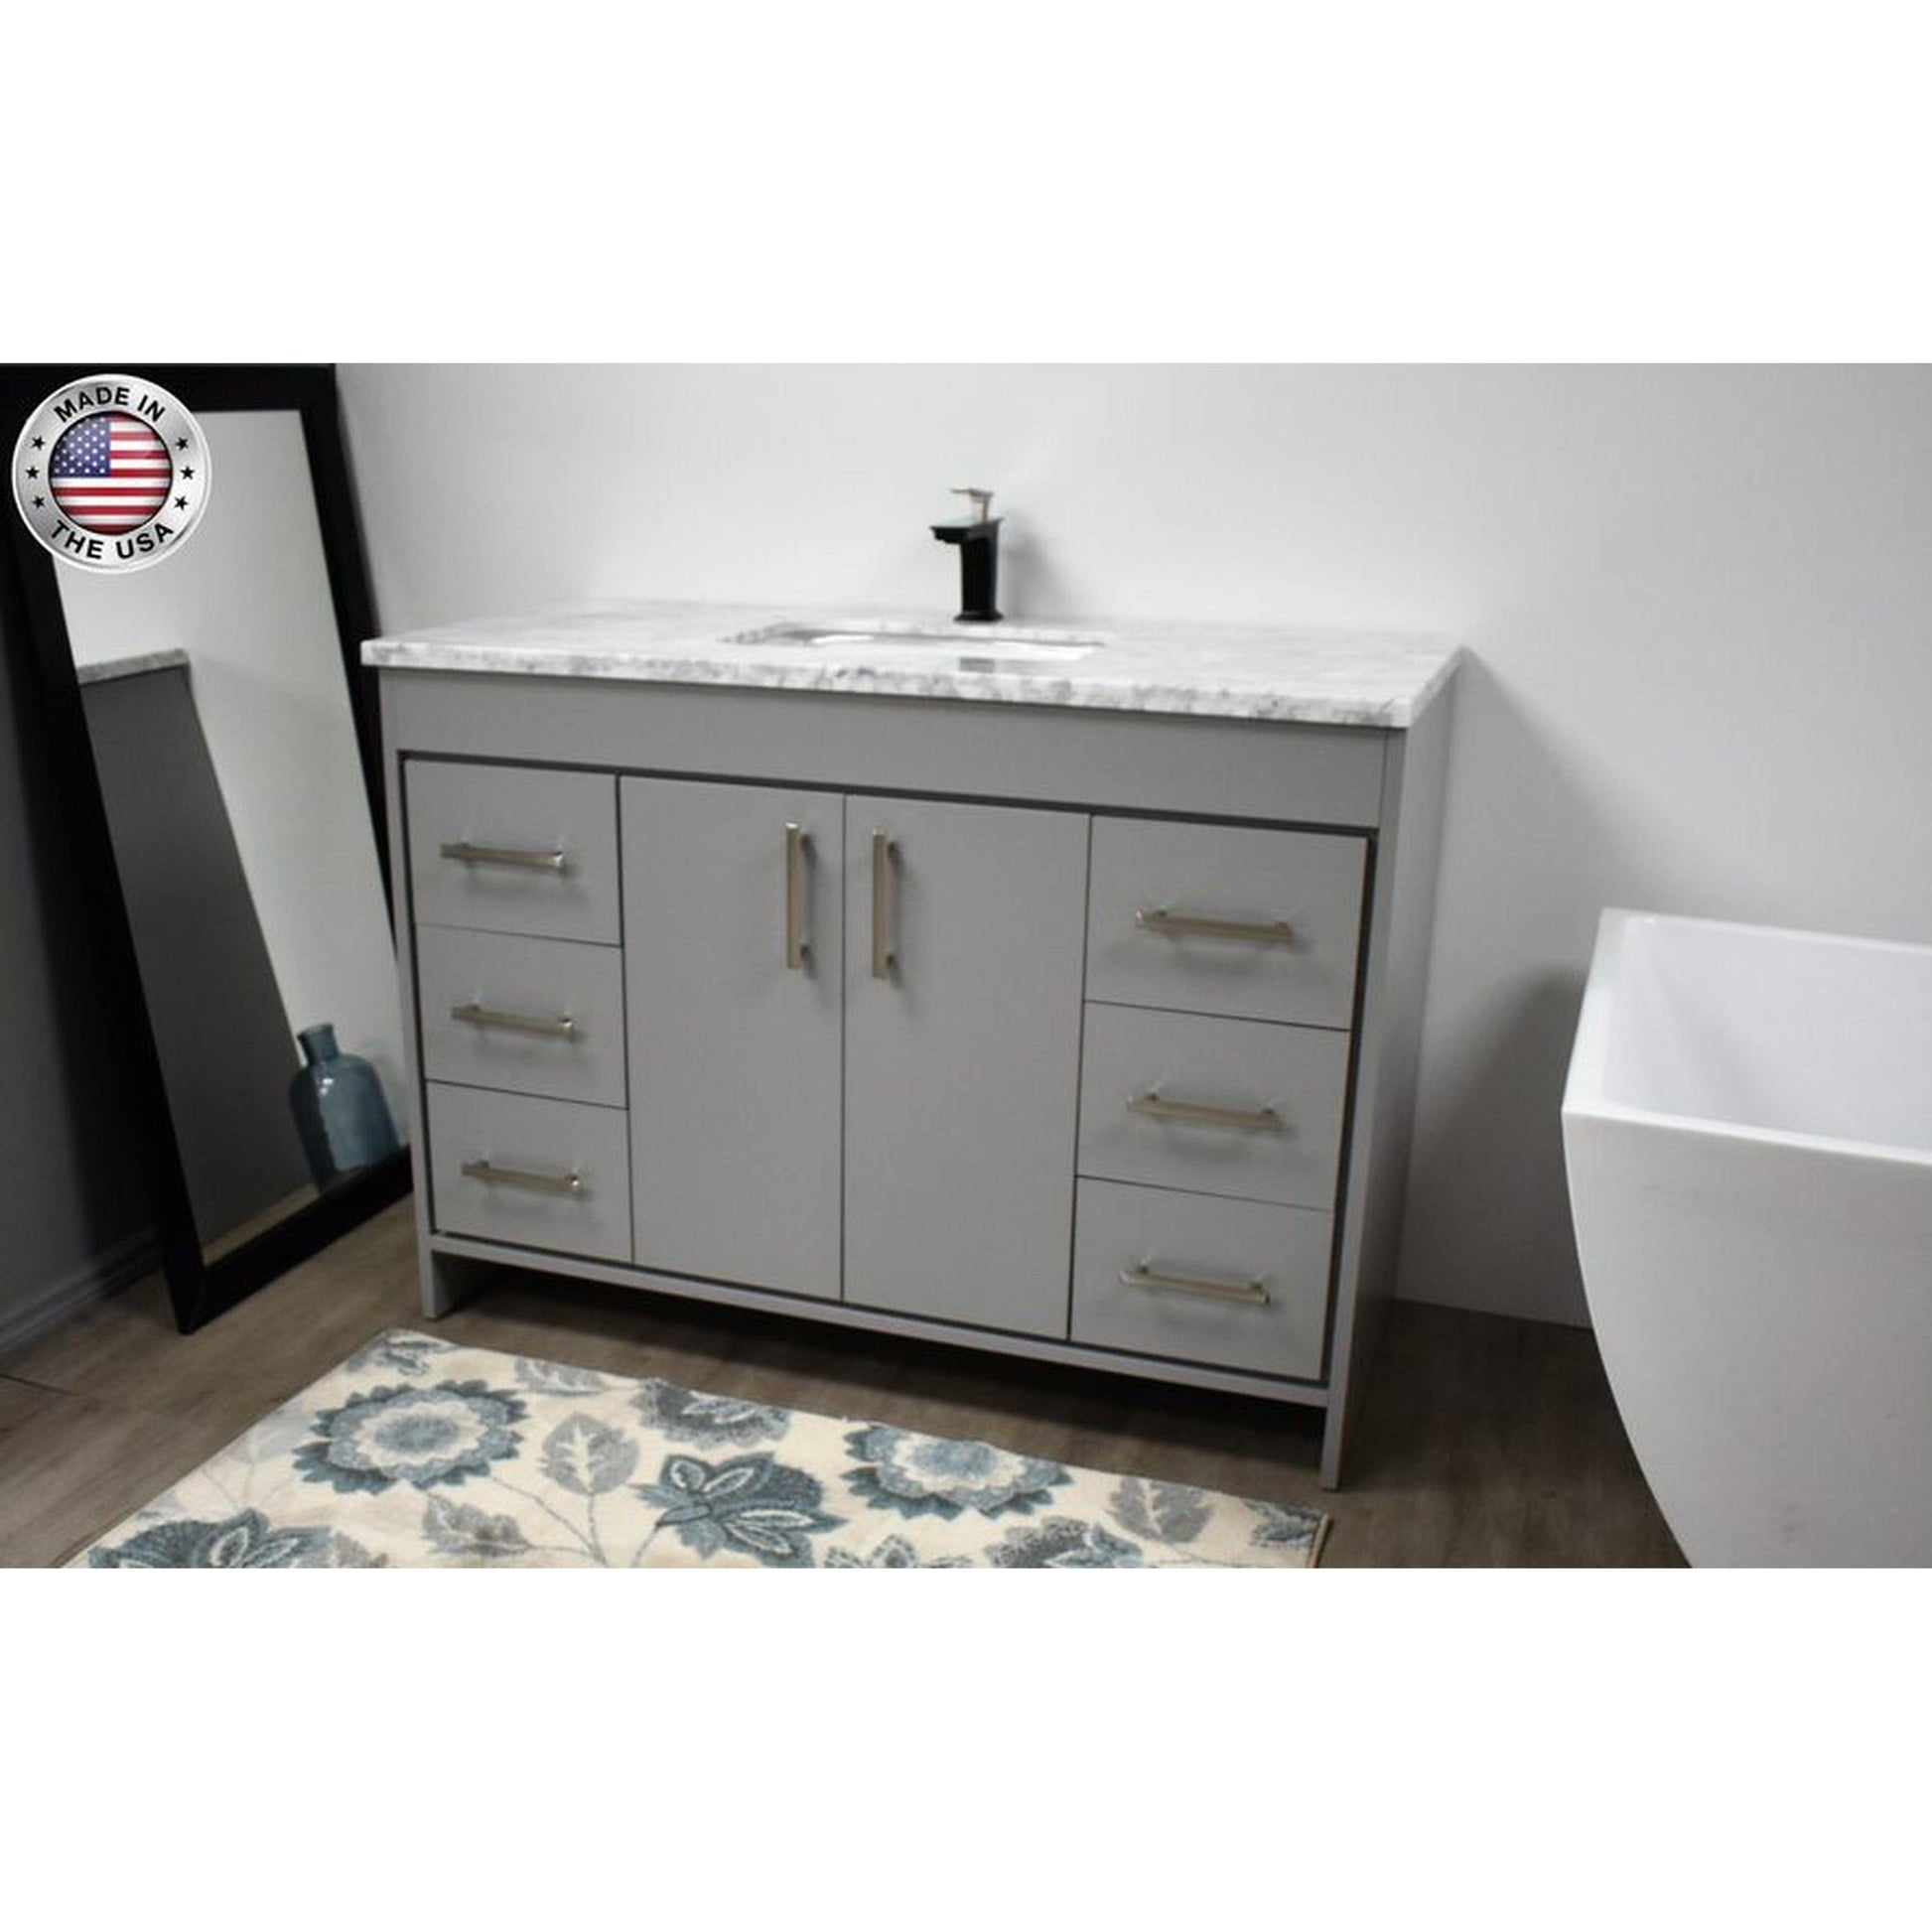 Volpa USA Capri 48" x 22" Gray Freestanding Modern Bathroom Vanity With Preinstalled Undermount Sink And Carrara Marble top With Brushed Nickel Edge Handles